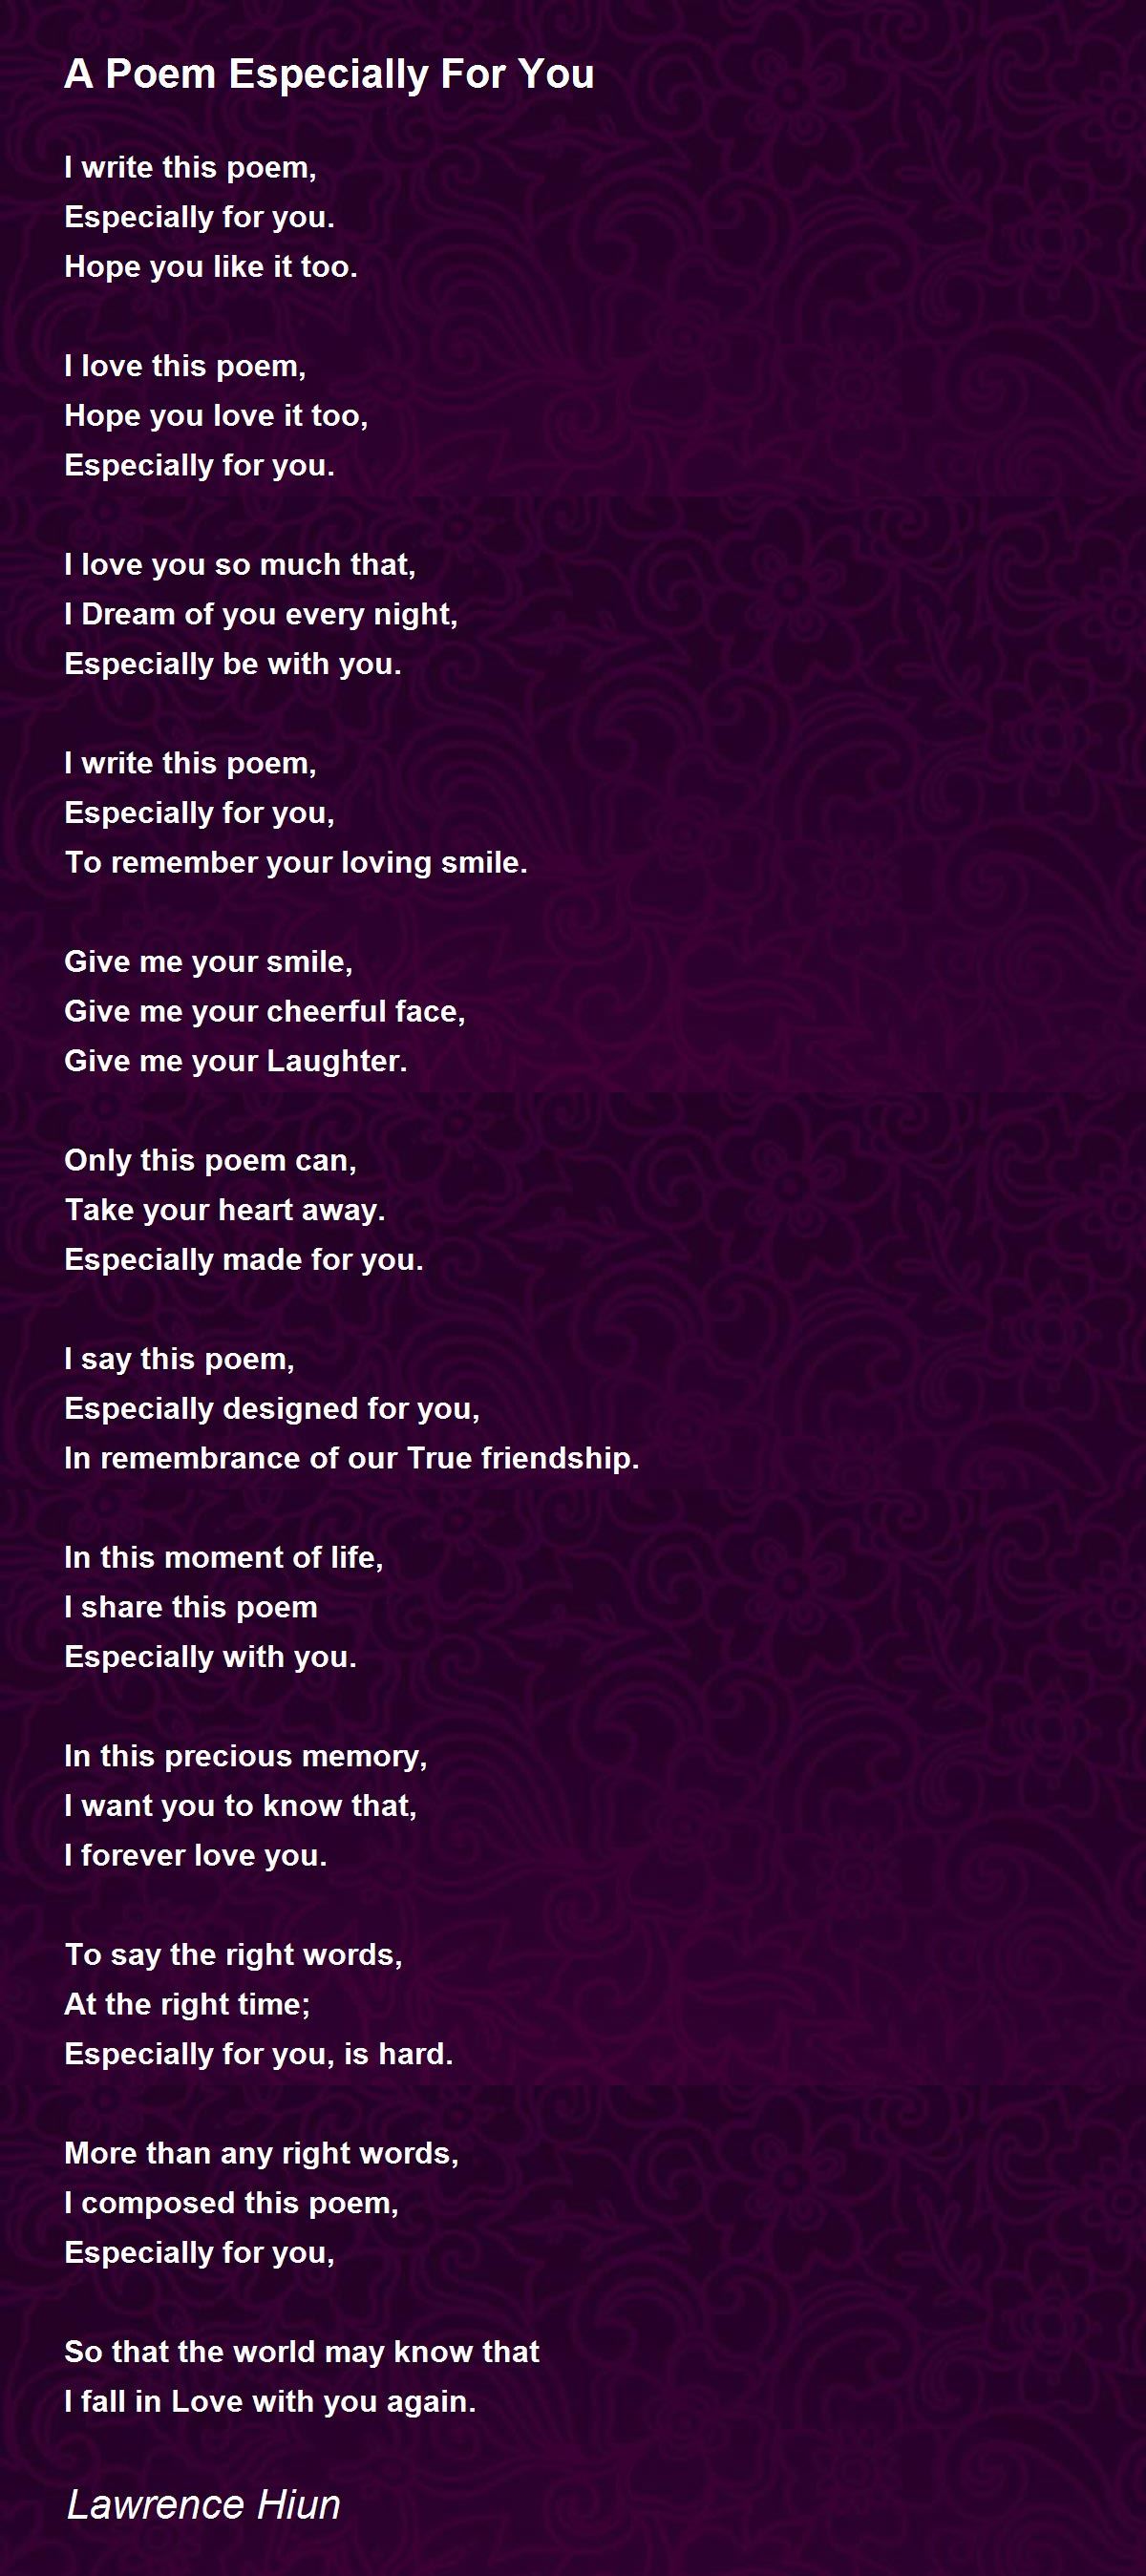 A Poem Especially For You by Lawrence H - A Poem Especially For